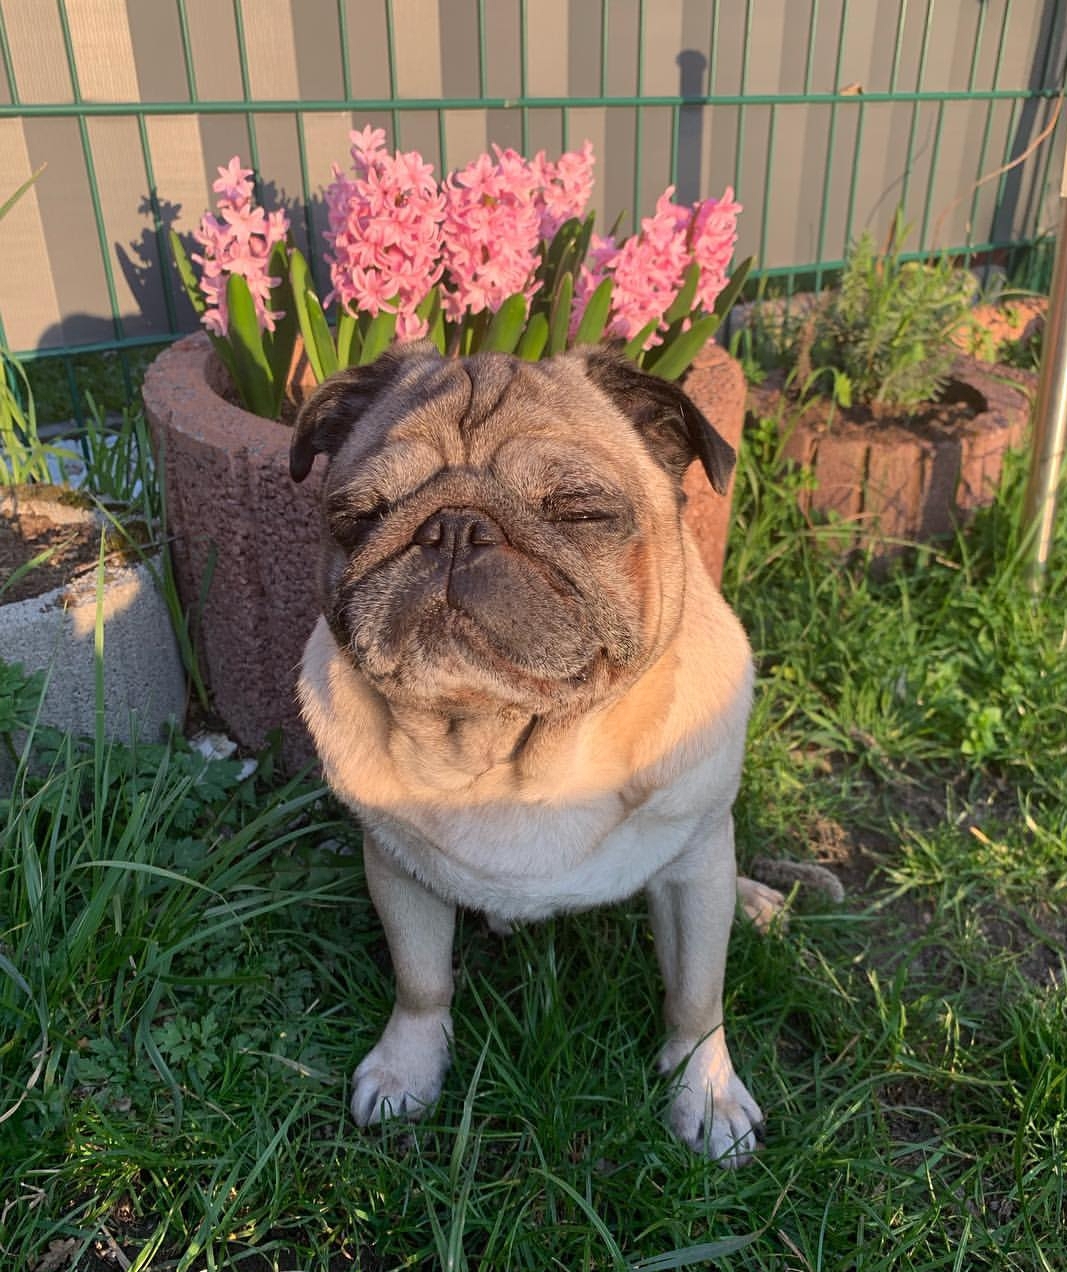 Pug sitting in the garden with an afternoon sunlight on its smiling face